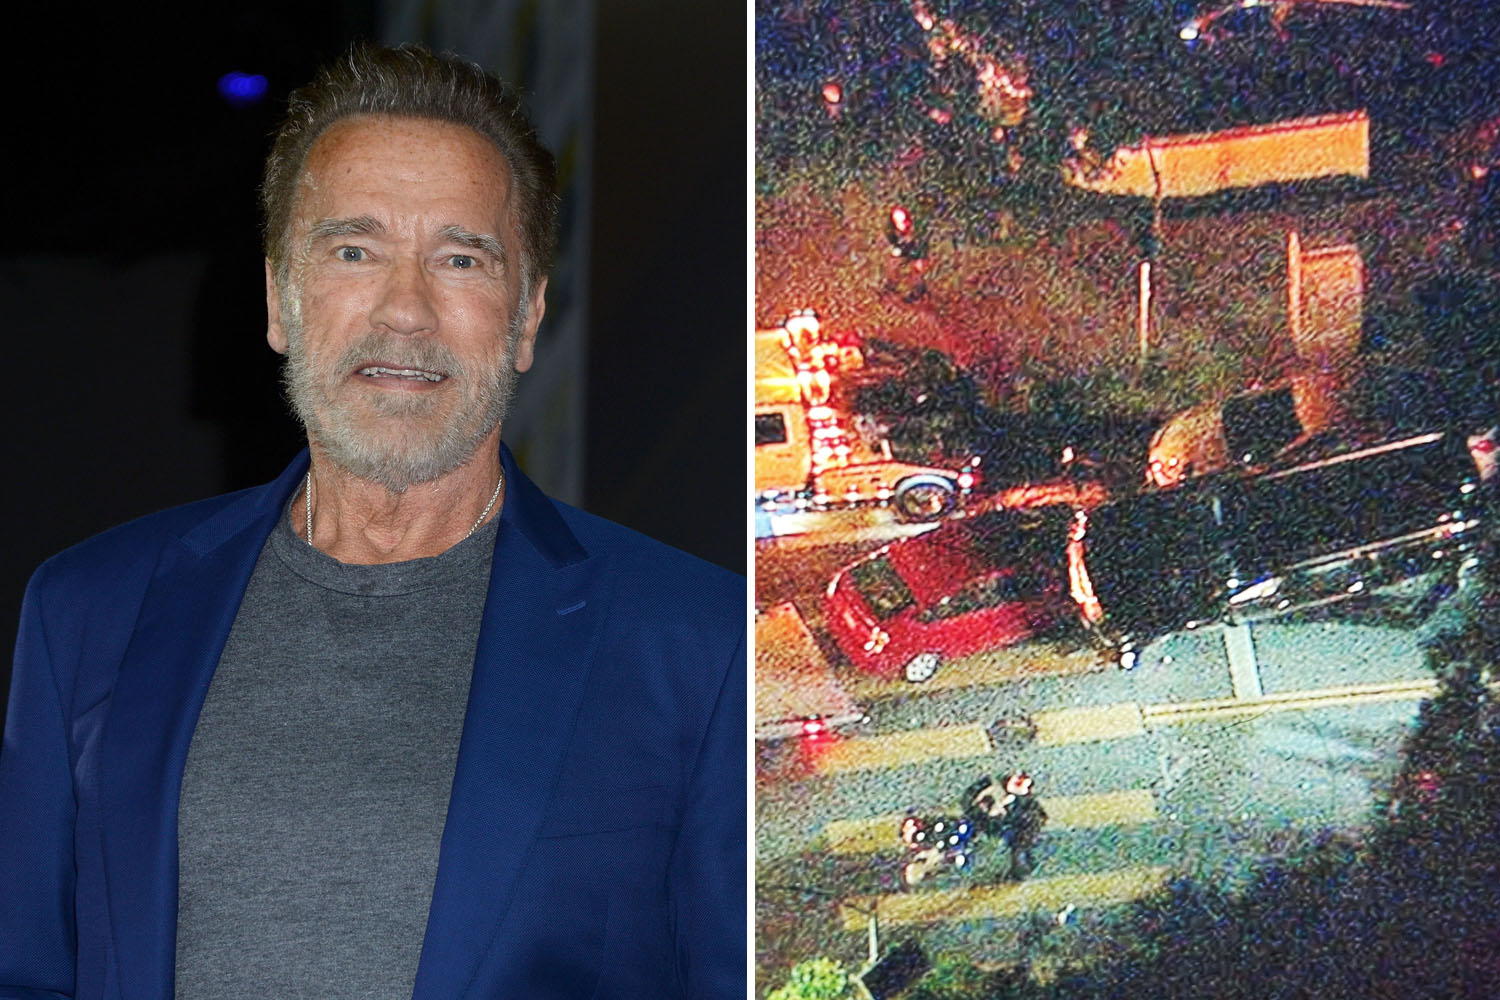 Arnold Schwarzenegger ‘in bad car accident as SUV rolls over onto Prius’ in wild crash ‘that left one perso... - The Sun